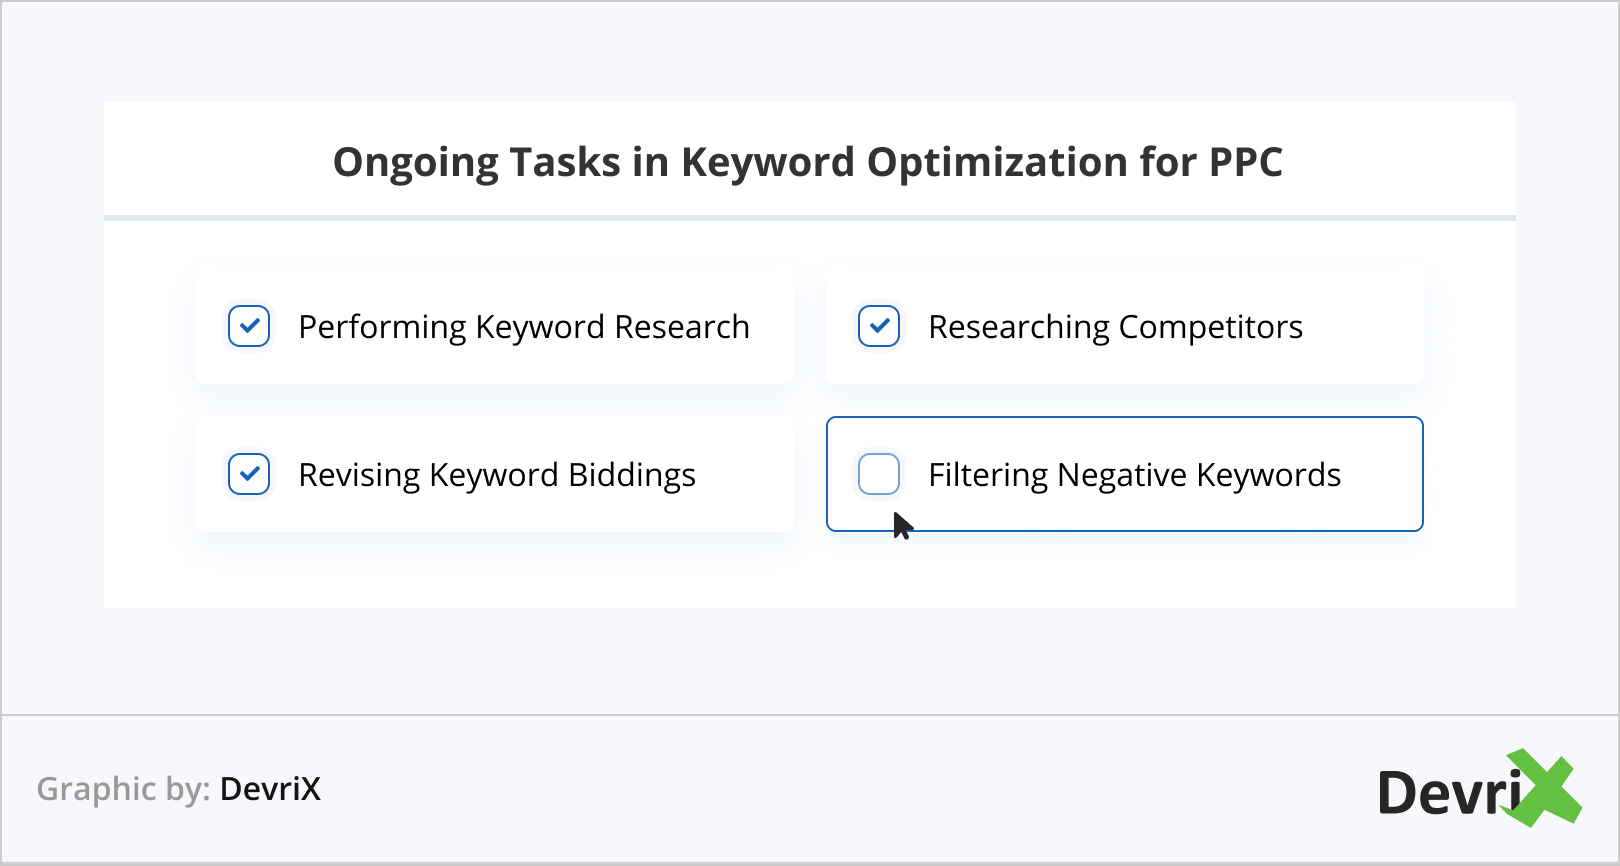 Ongoing Tasks in Keyword Optimization for PPC